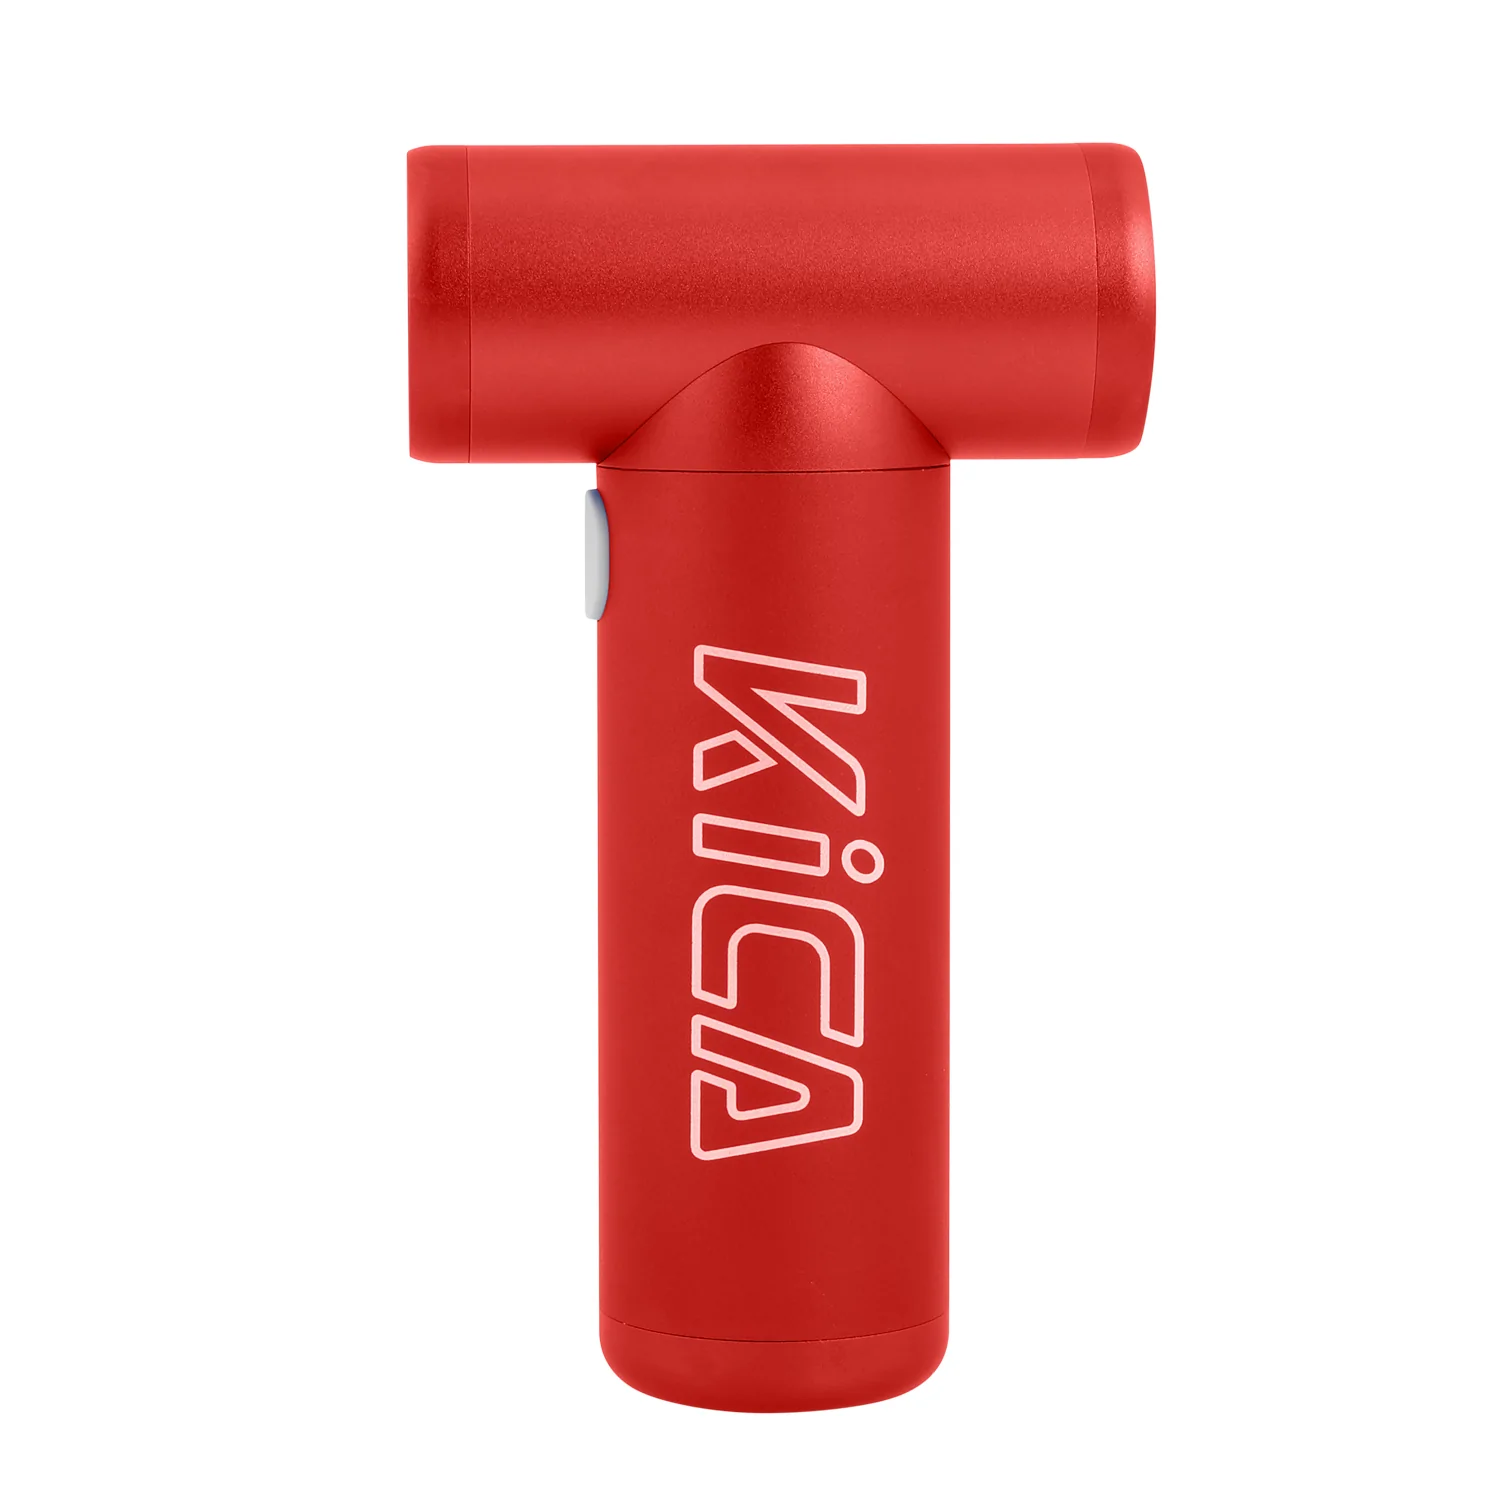 KiCA JetFan KC1 Compressed Air Duster Blower Red